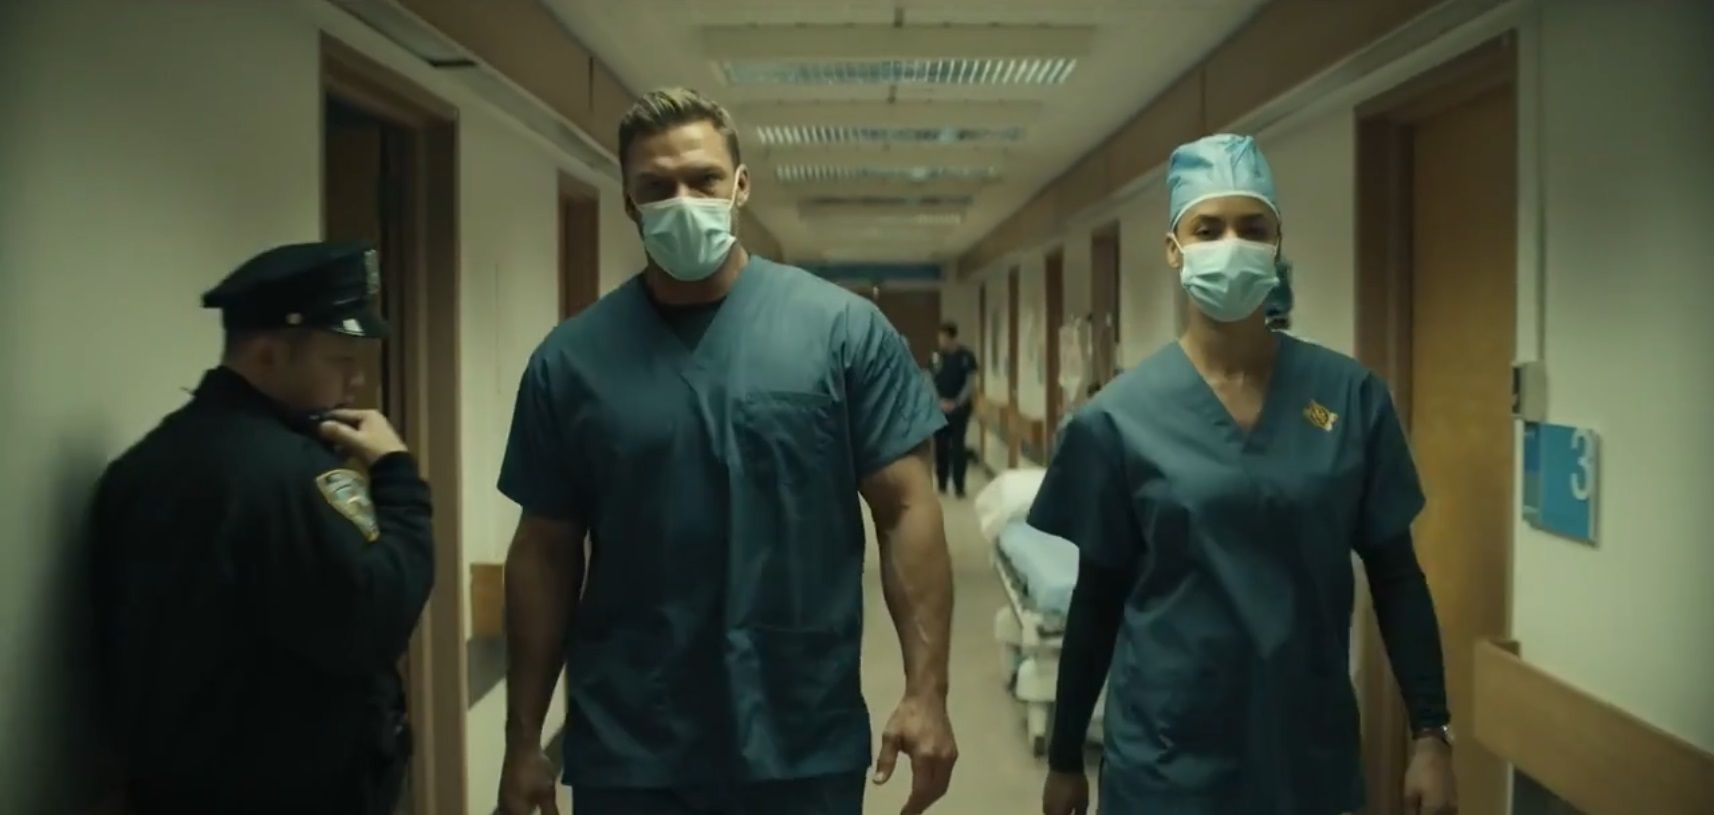 Reacher and Neagley disgused in scrubs and masks walking past a cop in a hospital from Season 2